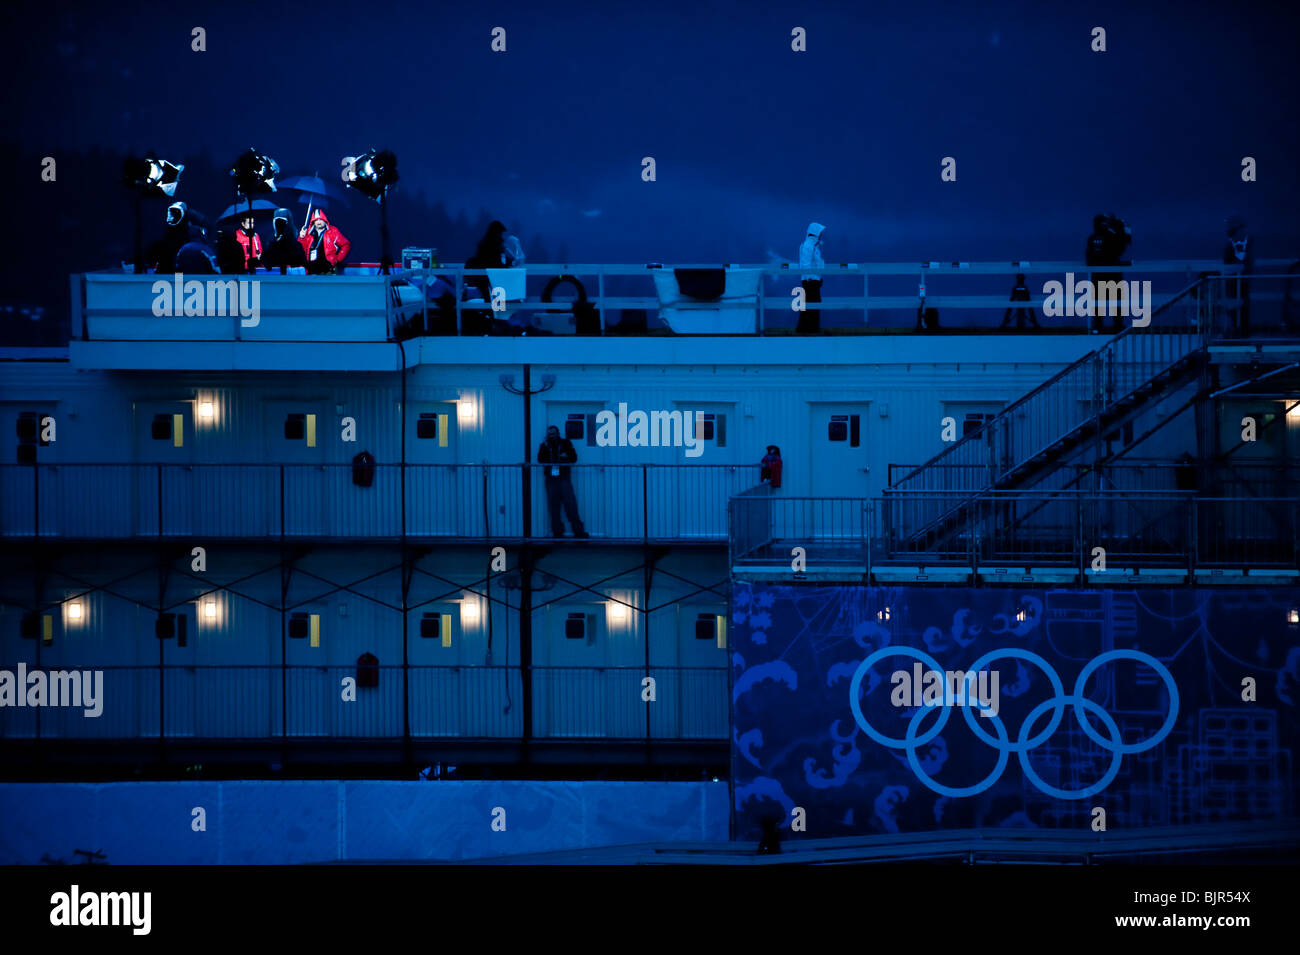 This is an image of the Olympic broadcasting building at the sliding center during the 2010 winter games. Stock Photo